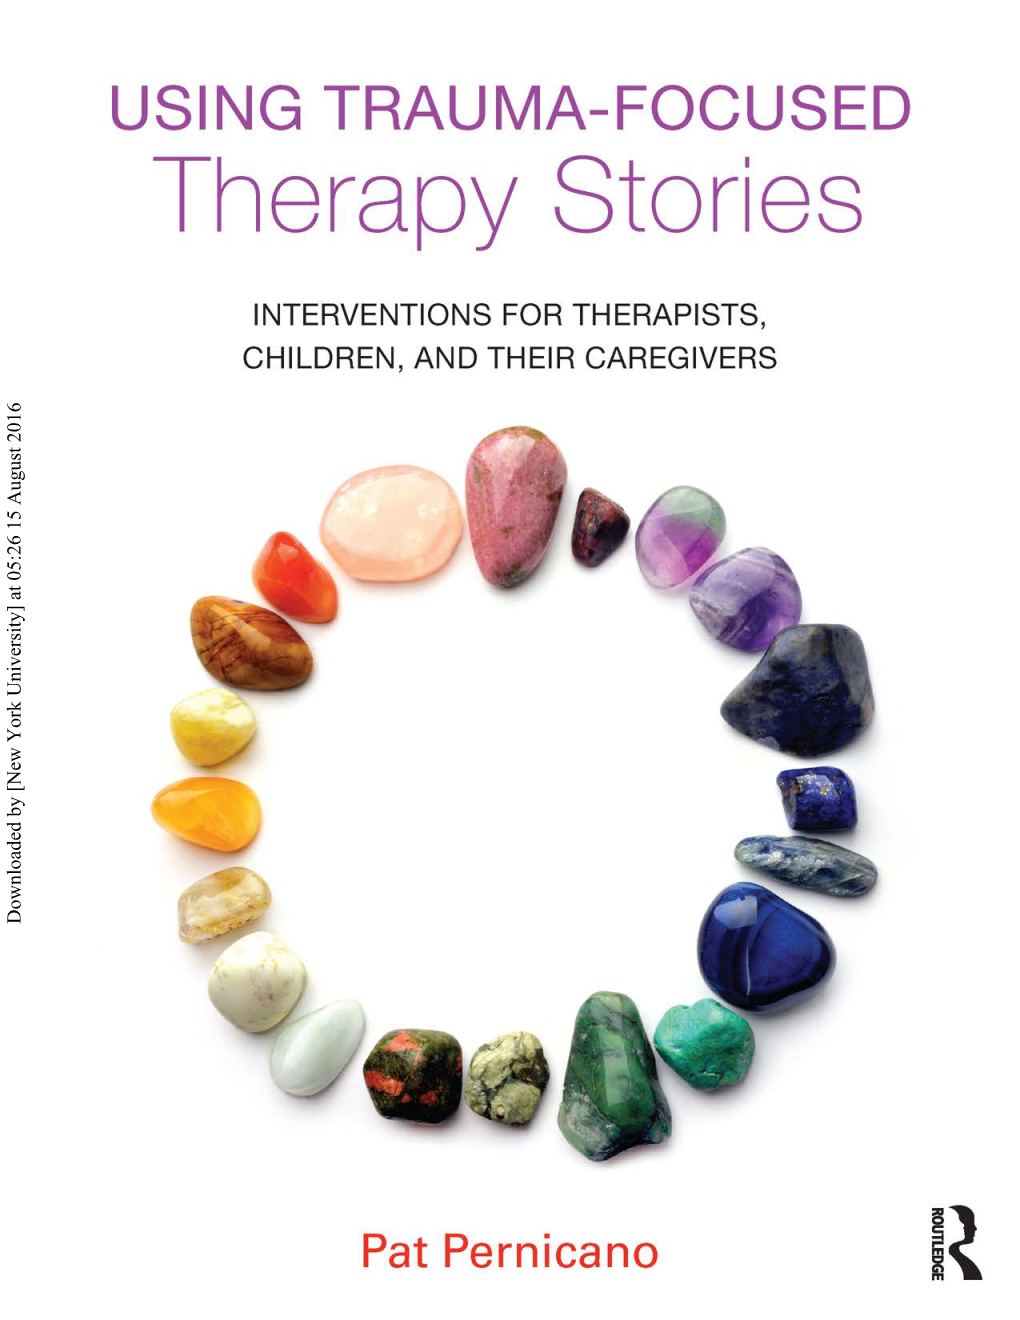 Downloaded by [New York University] at 05:26 15 August 2016 USING TRAUMA-FOCUSED THERAPY STORIES